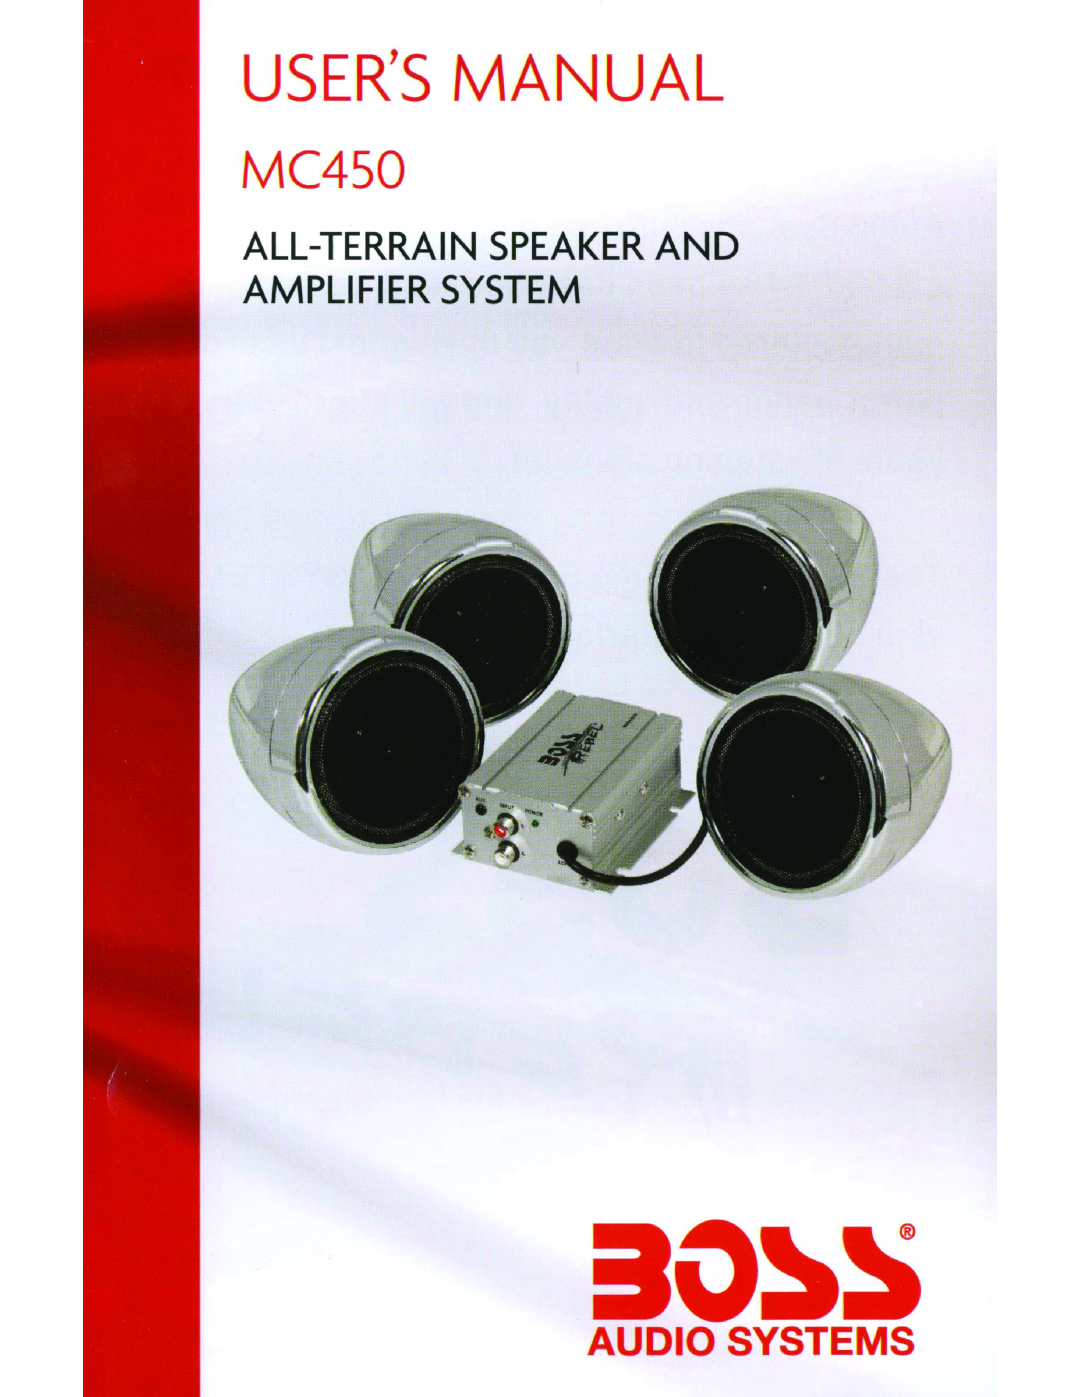 Boss Audio Systems MC450 user manual All-Terrainspeaker And Amplifier System, Audio Systems 